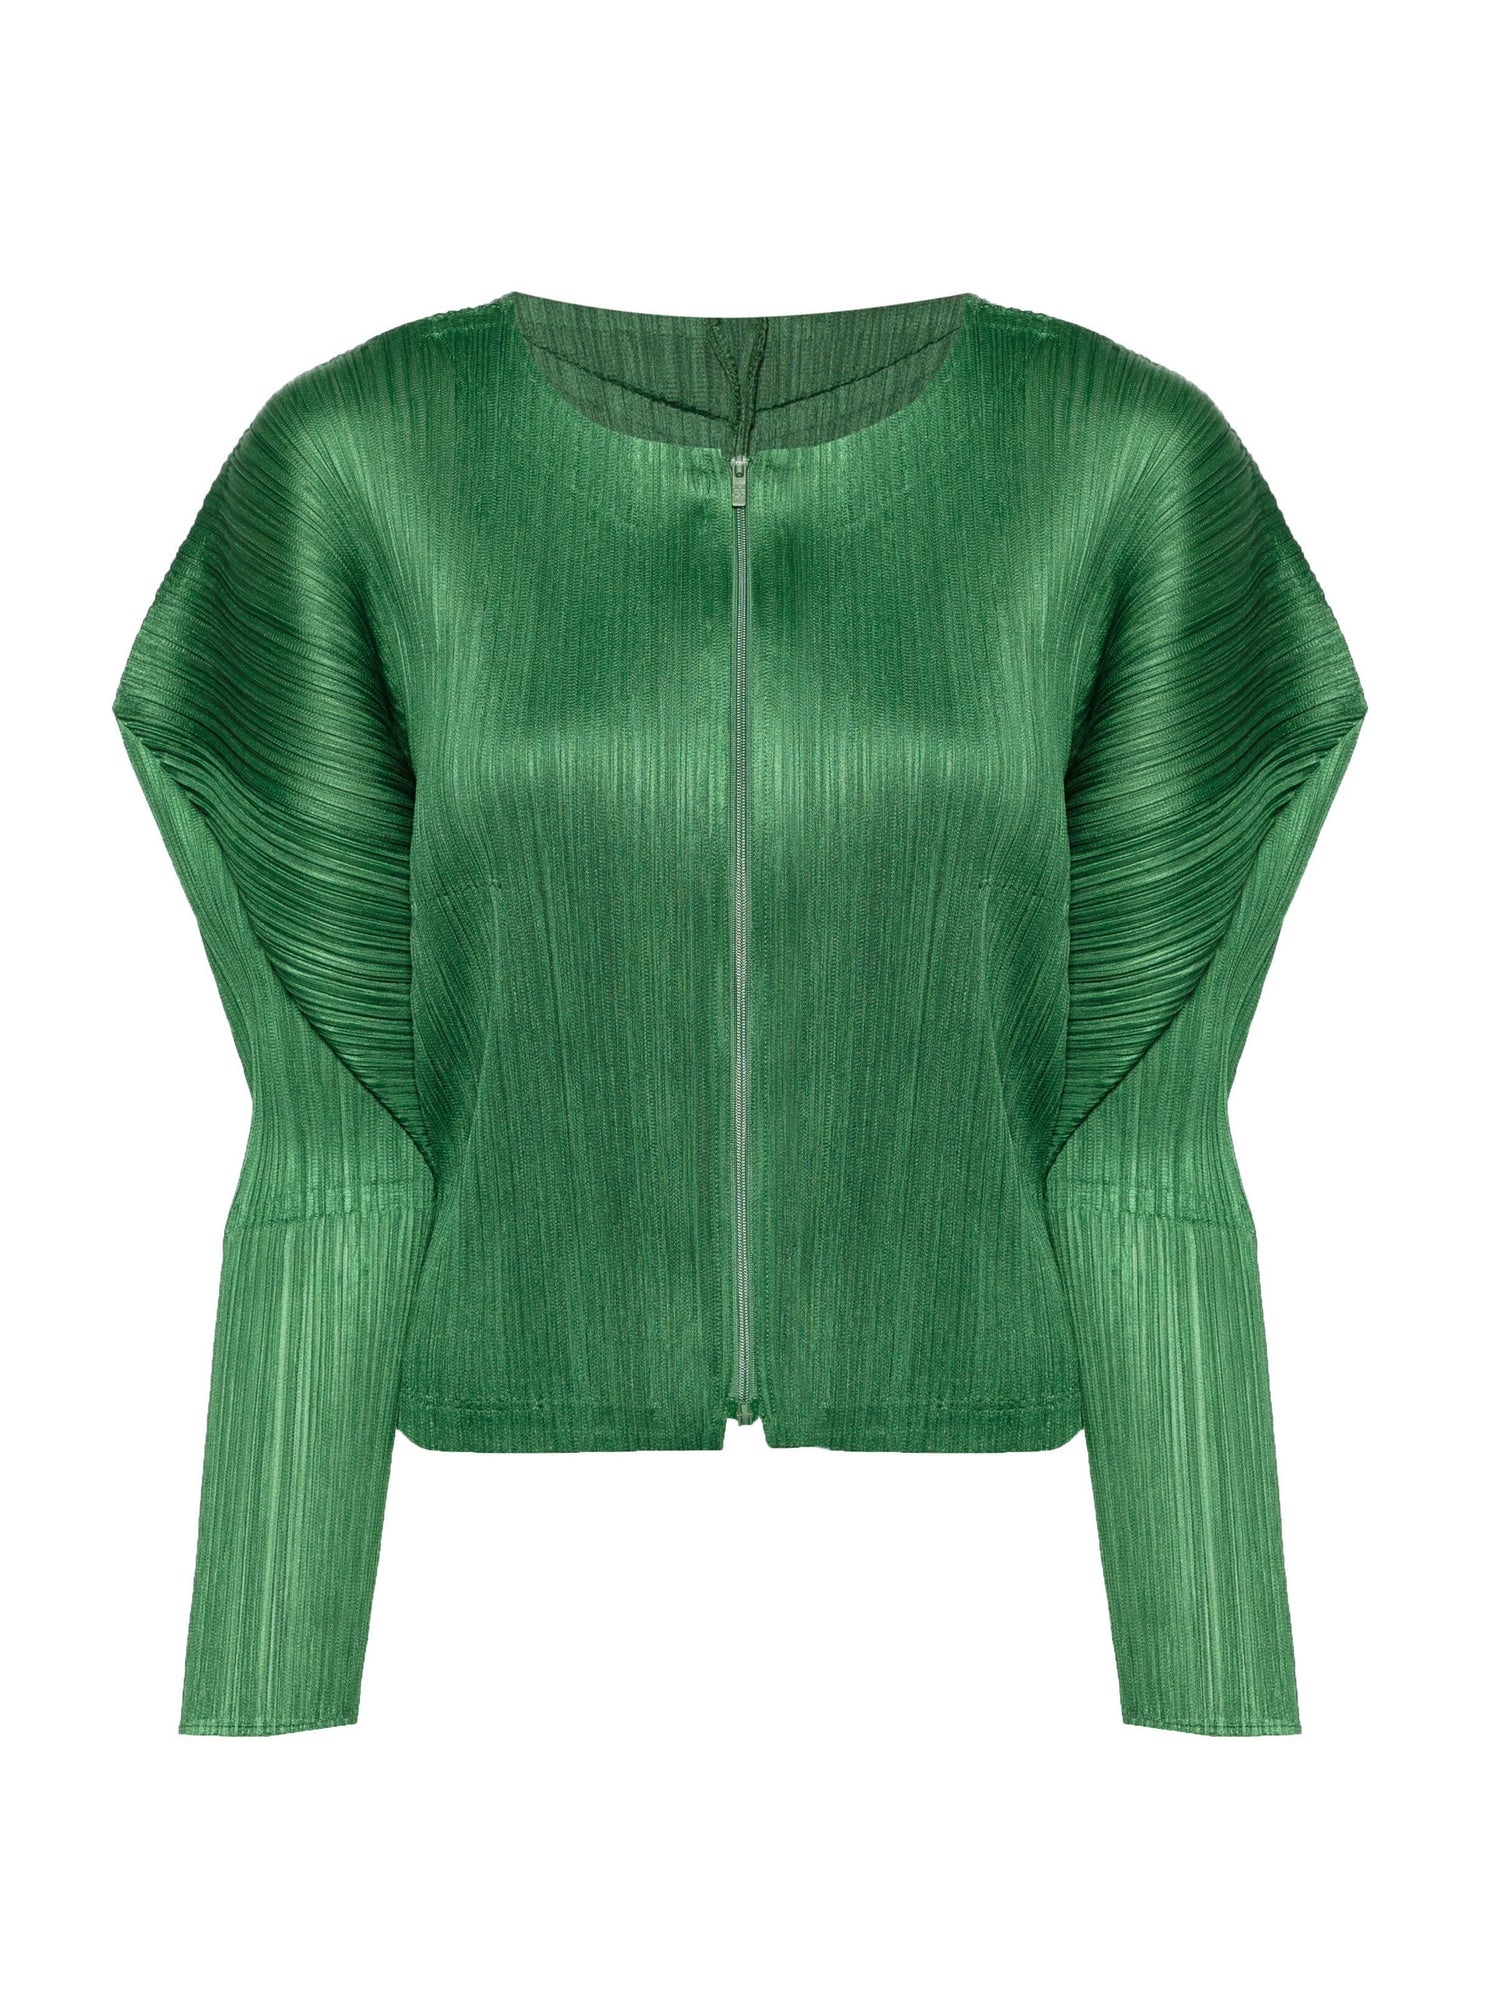 Pleated zip up jacket, green